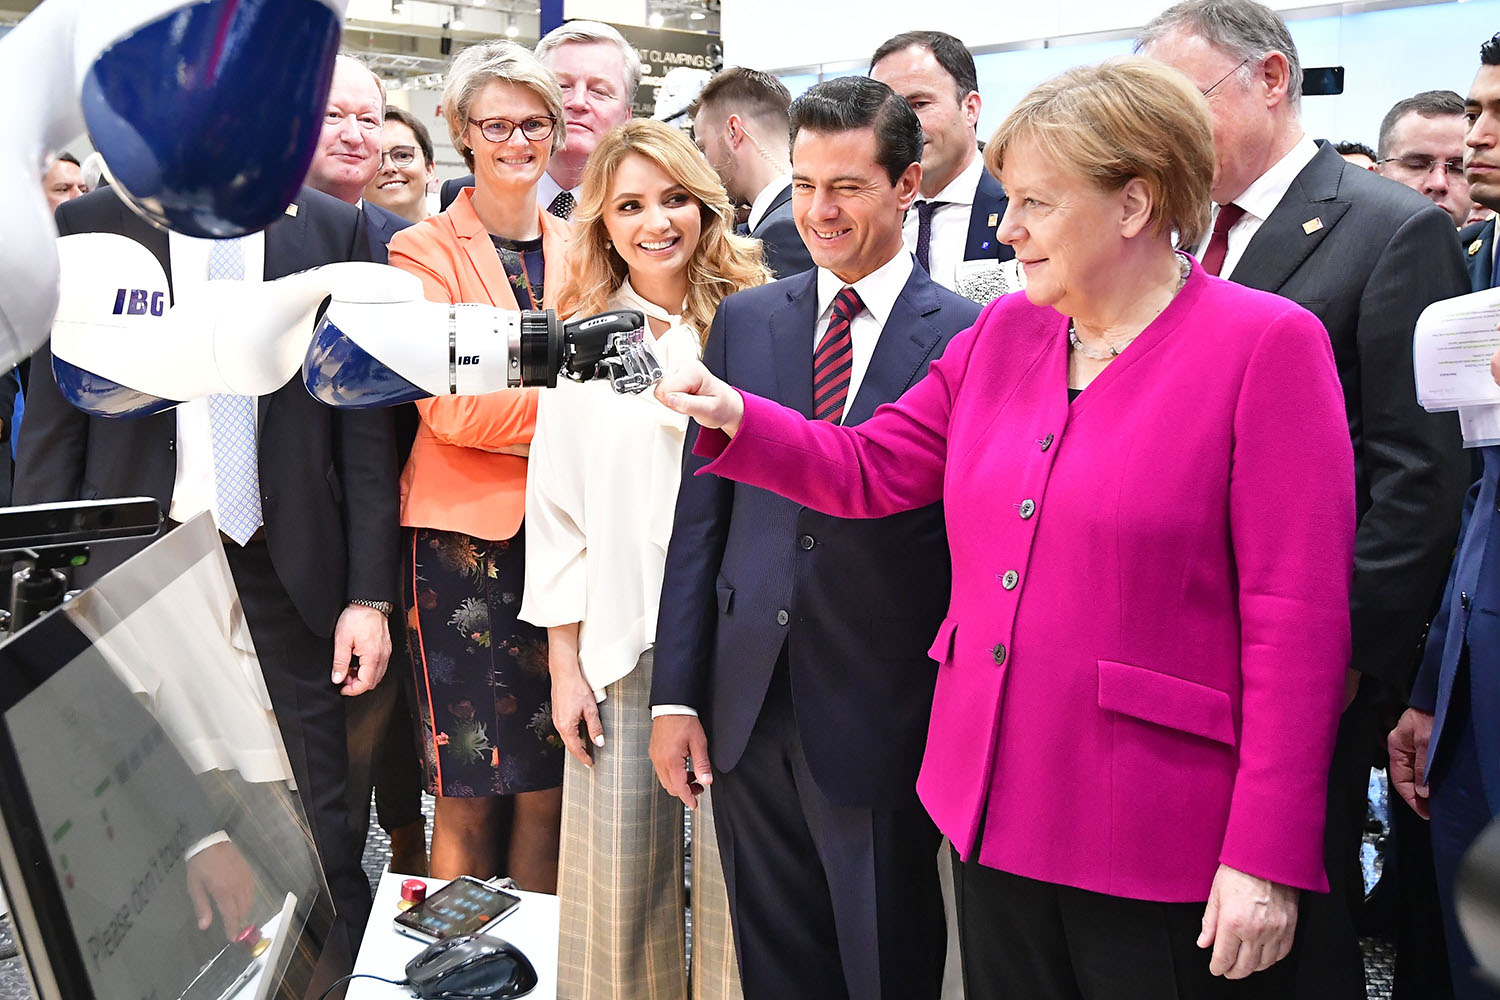 Then-German Chancellor Angela Merkel greets a robot next to then-Mexican President Enrique Peña Nieto as they visit the IBG Automation stand during the Hannover Messe technology fair in Hanover, Germany, on April 23, 2018.